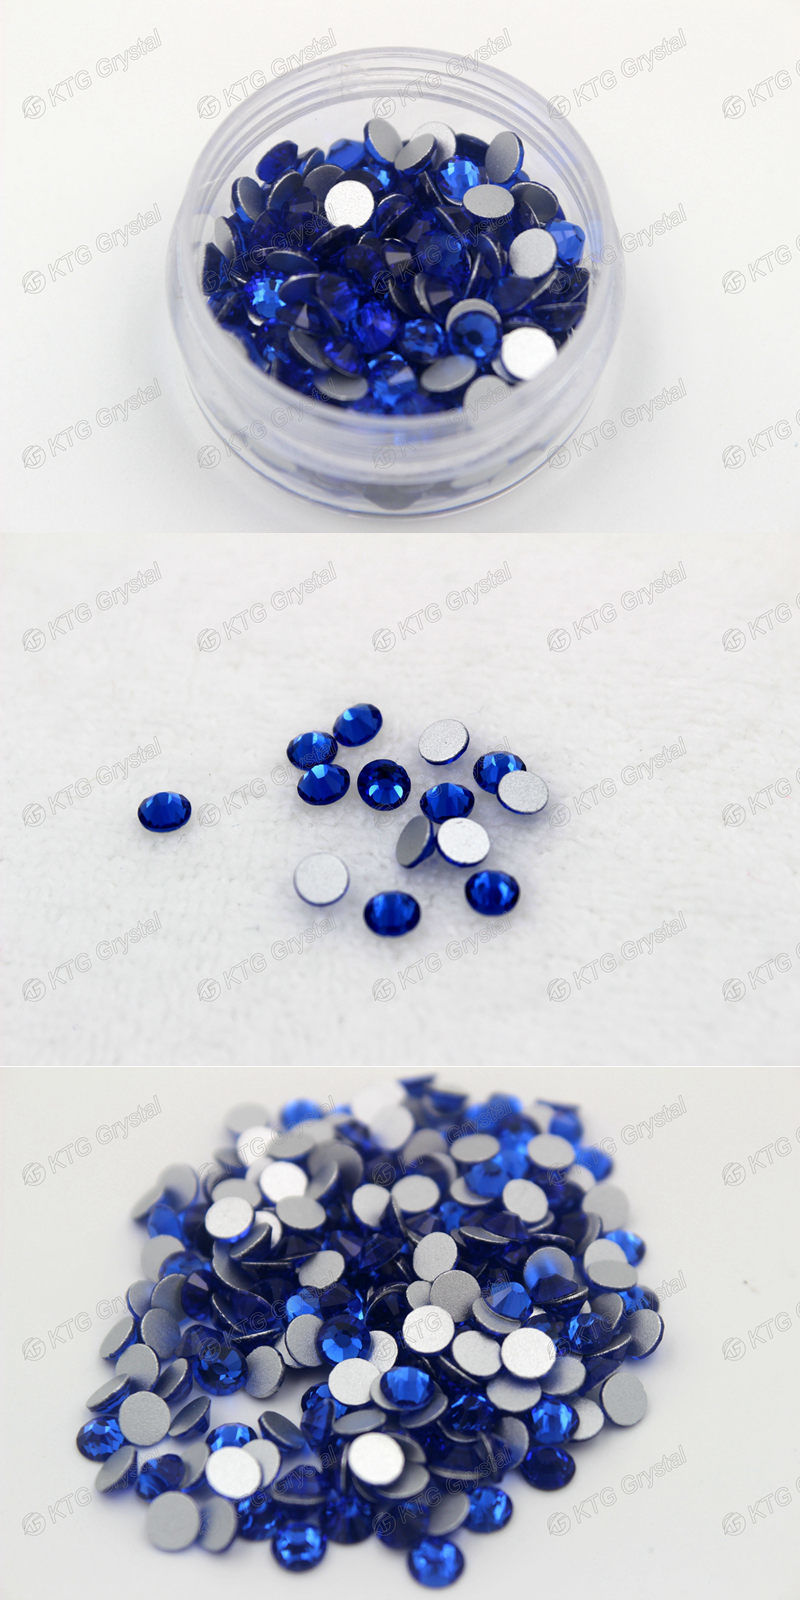 Shiny Loose Gems Flat Back Non Hotfix, Glass Clear Crystals Nails Art Charms